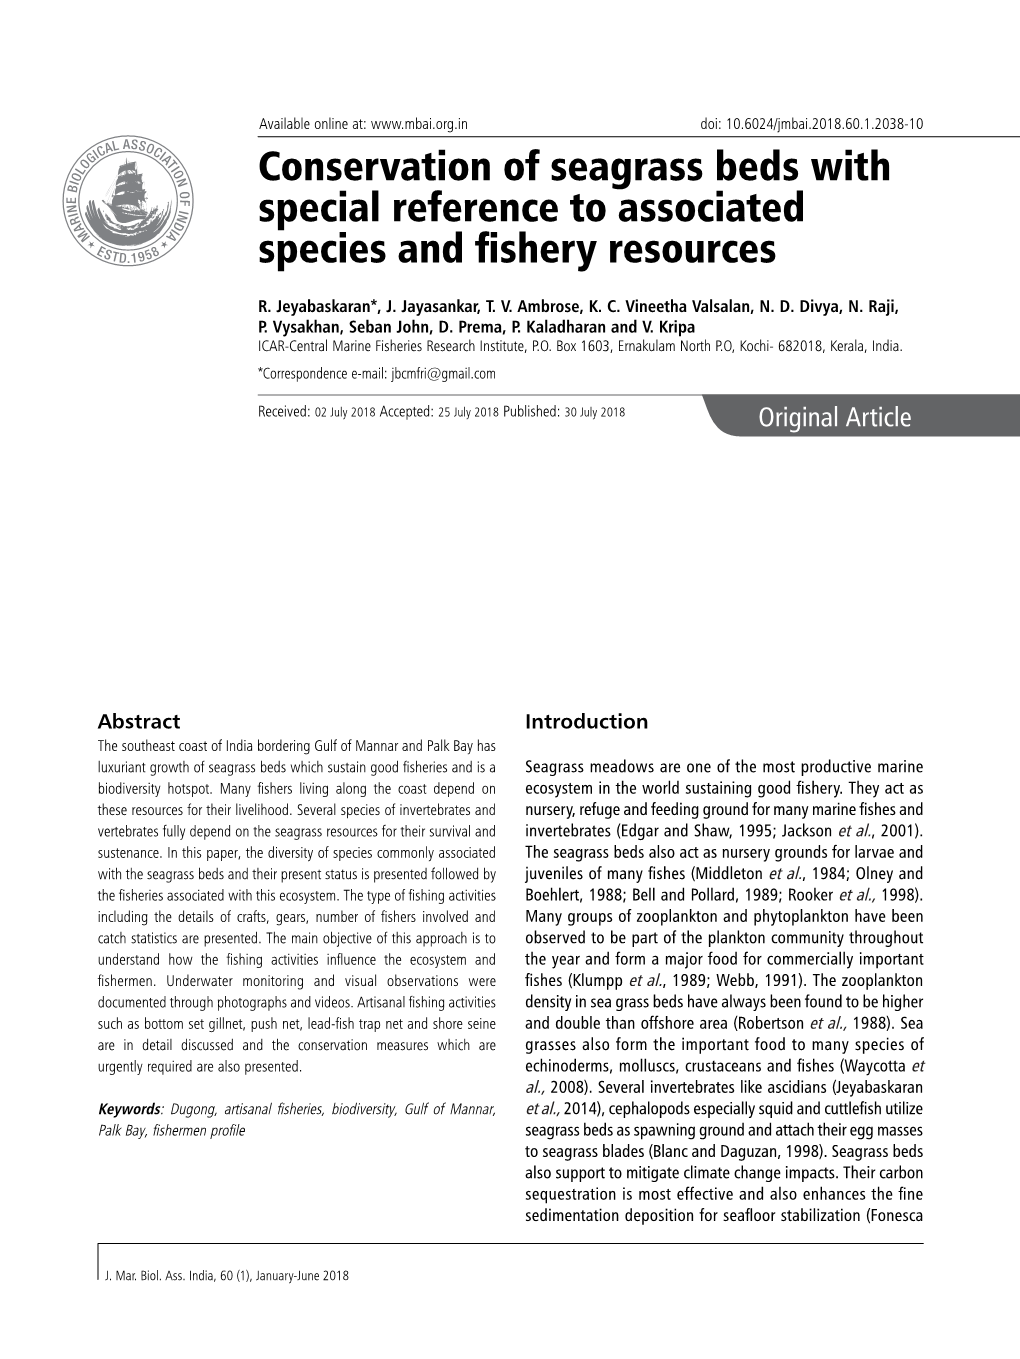 Conservation of Seagrass Beds with Special Reference to Associated Species and Fishery Resources